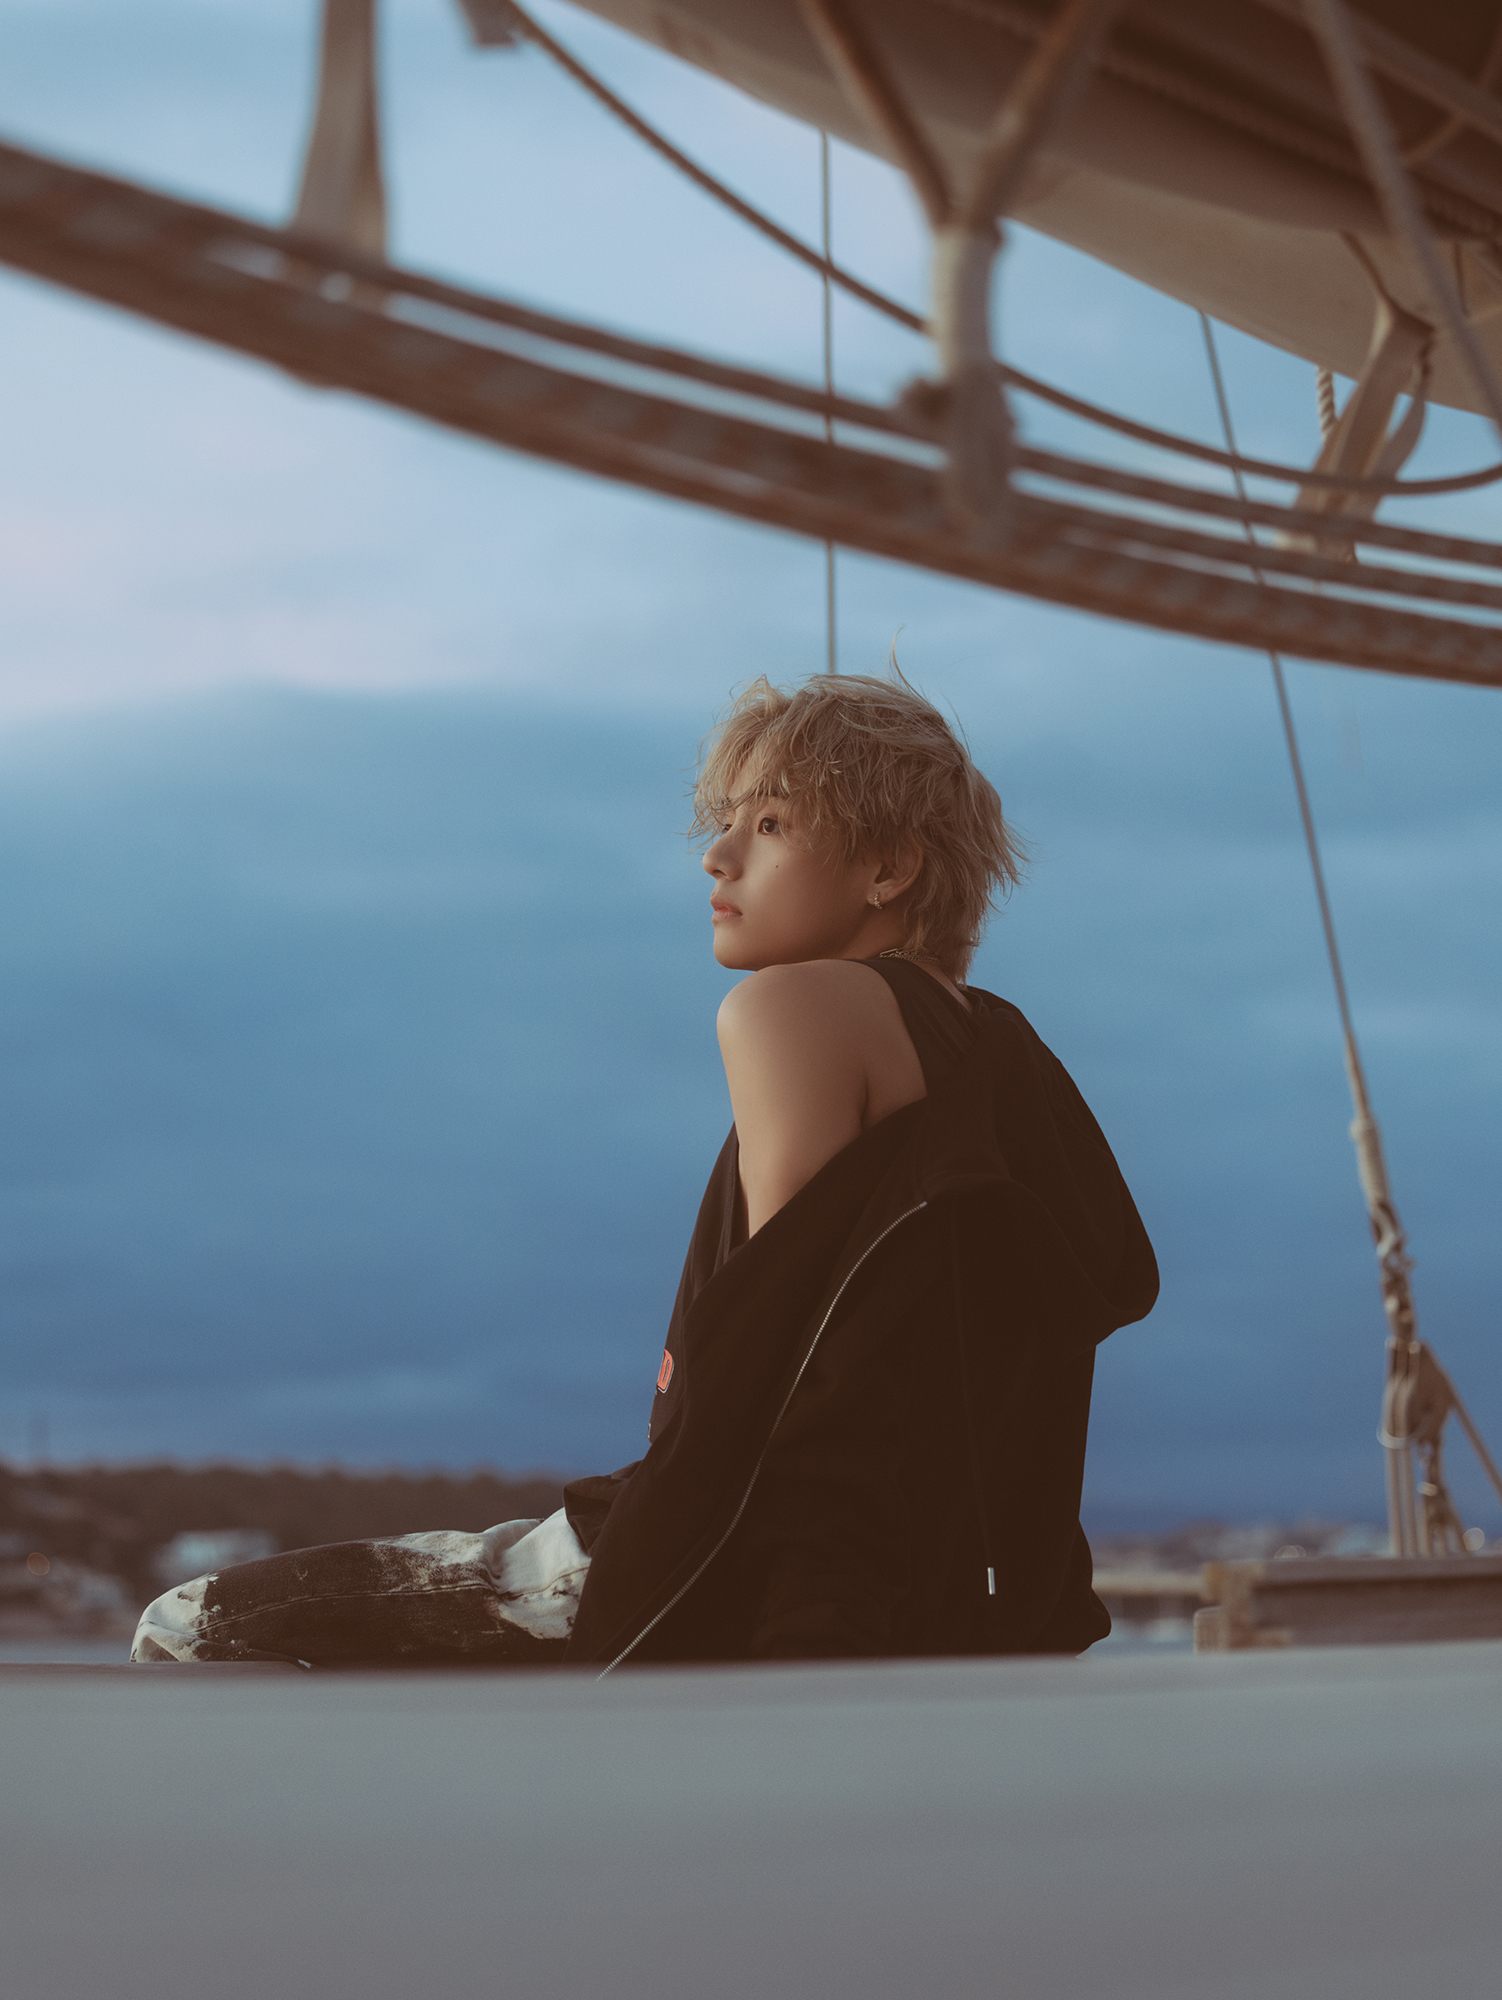 Layover Album by V Taehyung of BTS - Layover Album By V Taehyung Of Bts -  Magnet